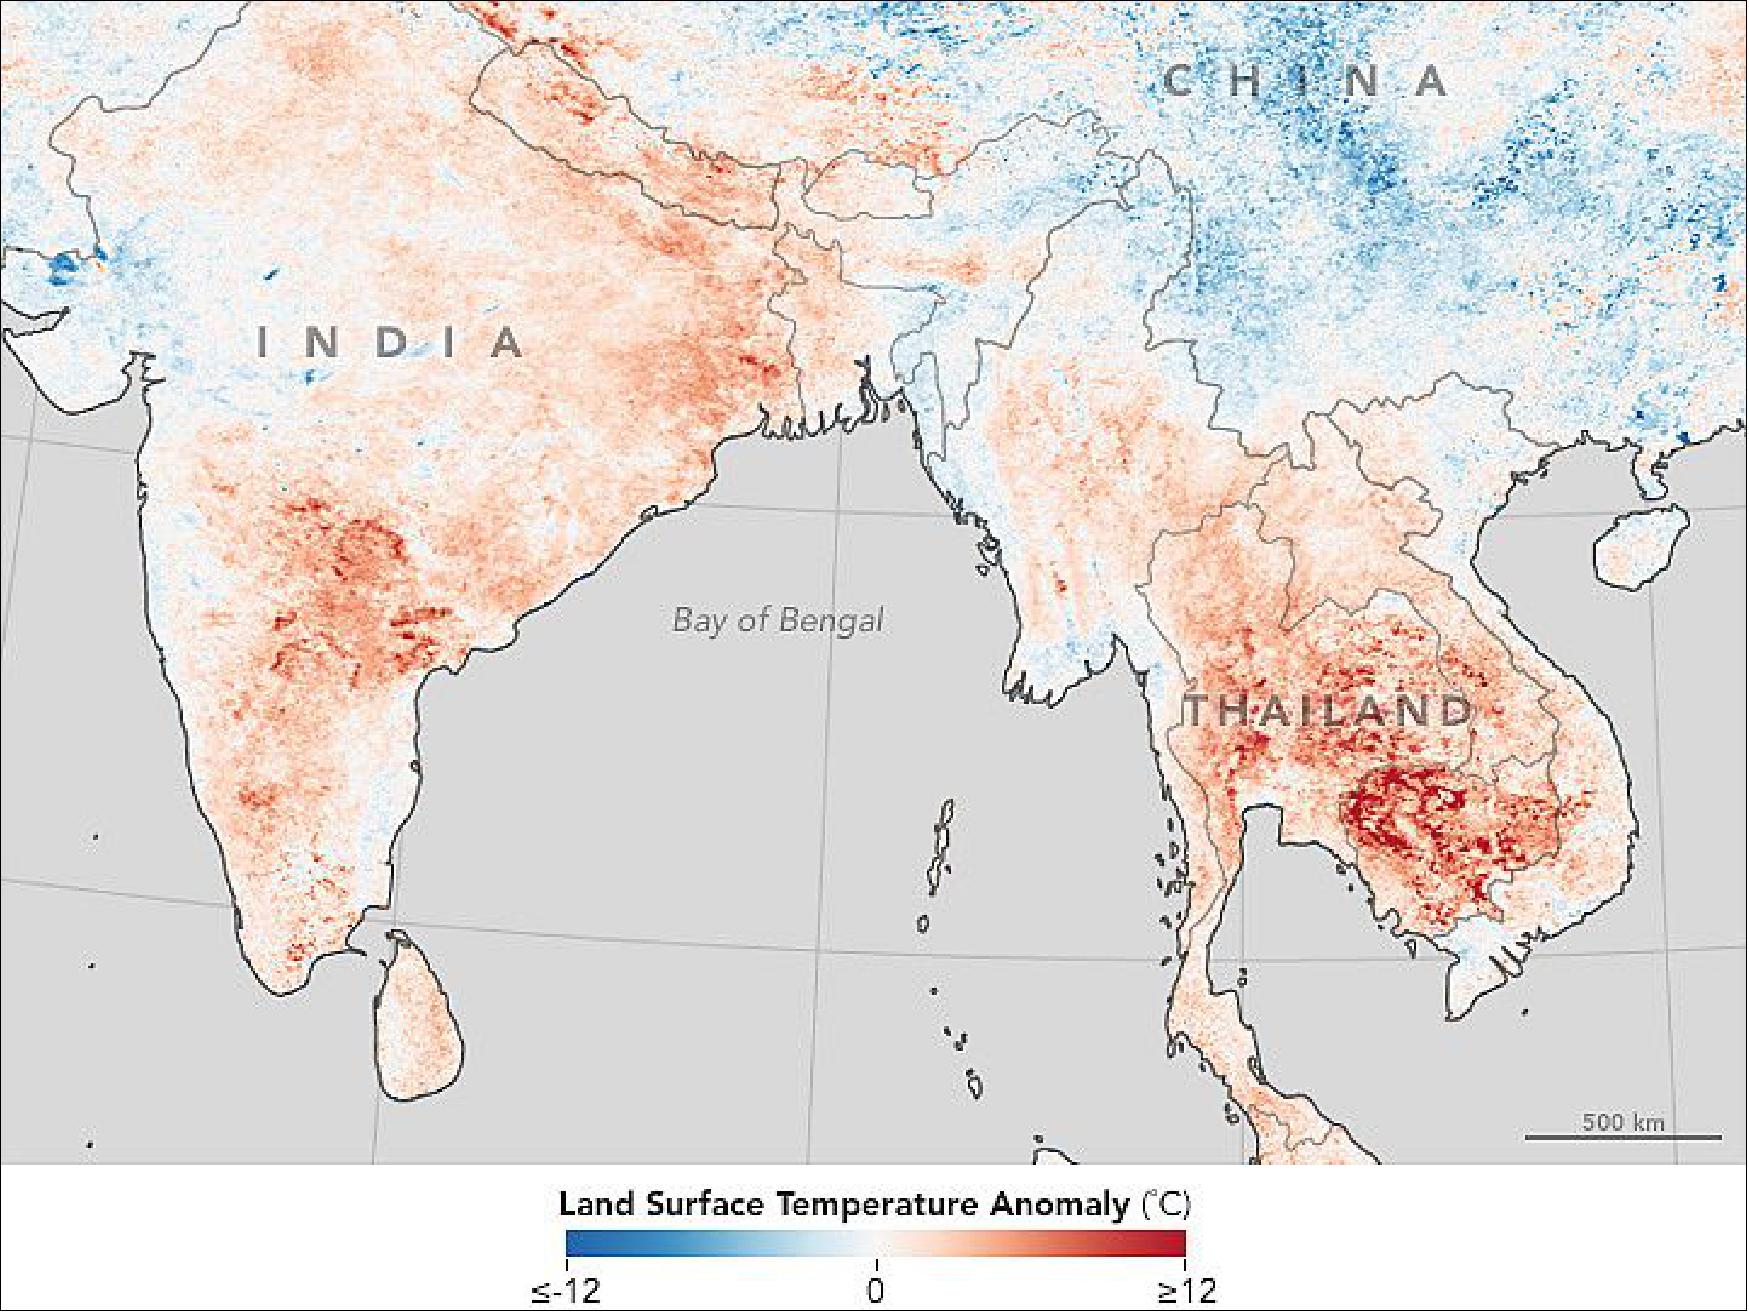 Figure 85: This temperature anomaly map is based on data from the MODIS instrument on NASA's Terra satellite, acquired in April 2016 (image credit: NASA Earth Observatory, image by Jesse Allen)